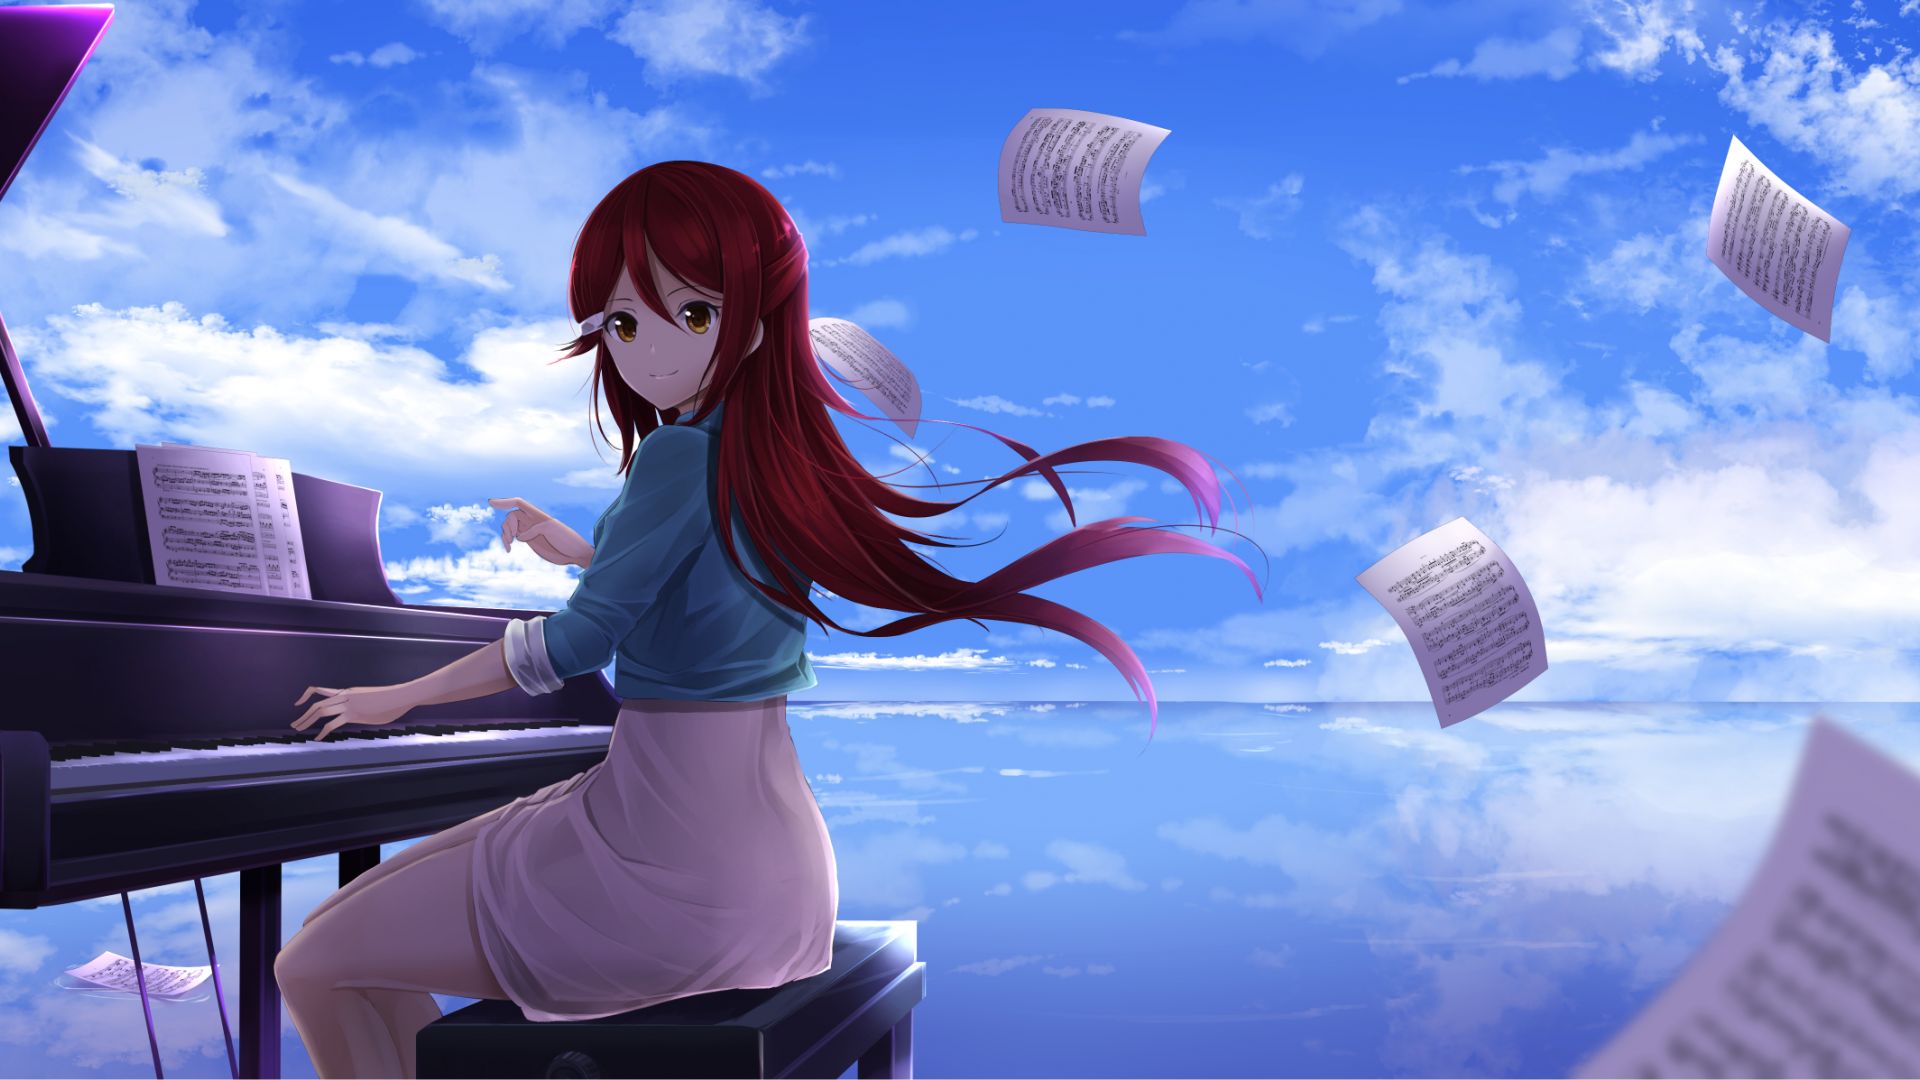 Desktop Wallpaper Cute Red Head Anime Girl, Hd Image, Picture, Background,  2xhnzs